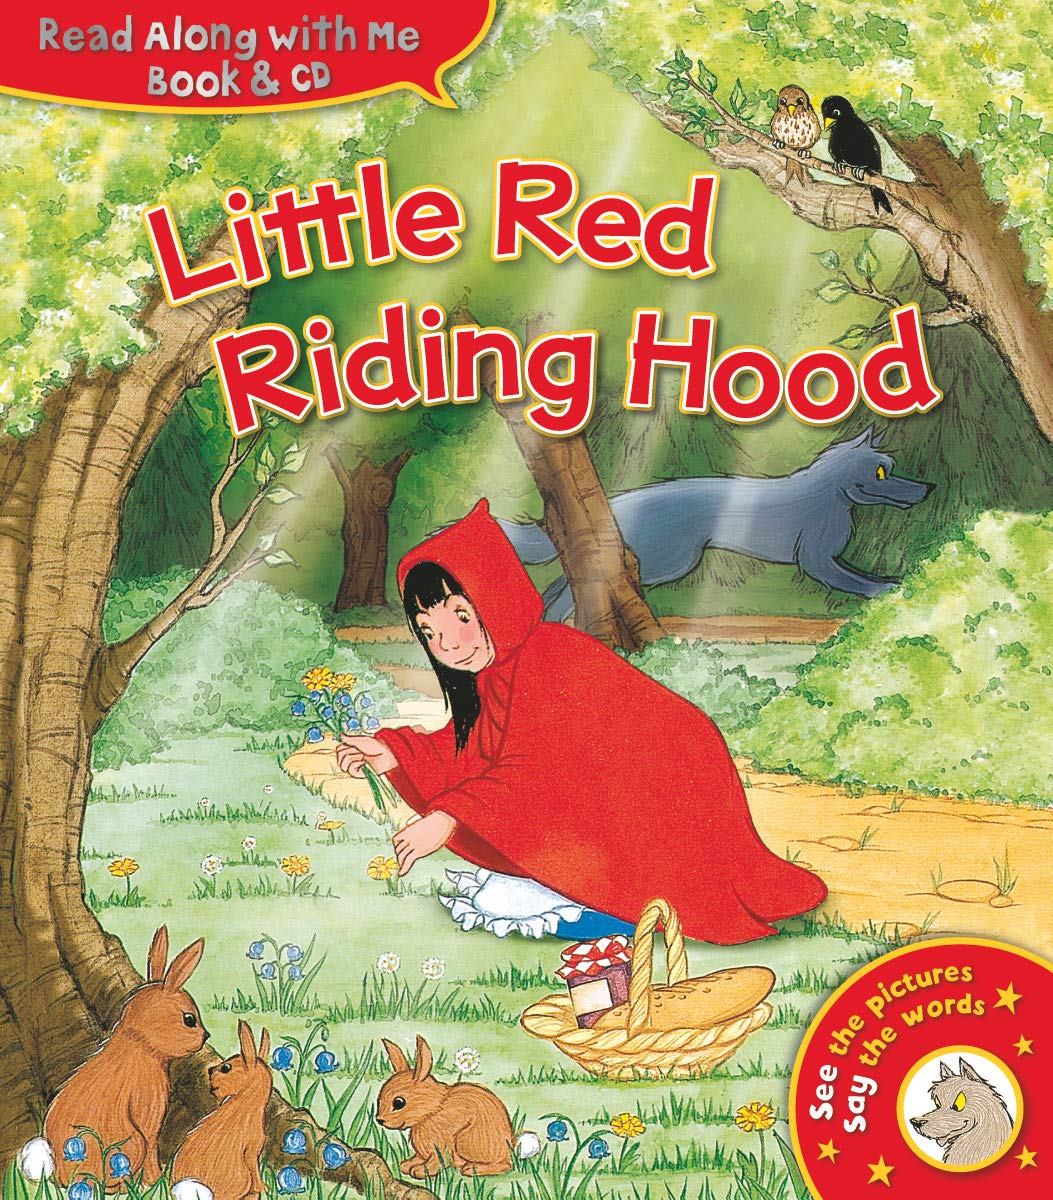 Little Red Riding Hood Read Along with Me (Book & CD)